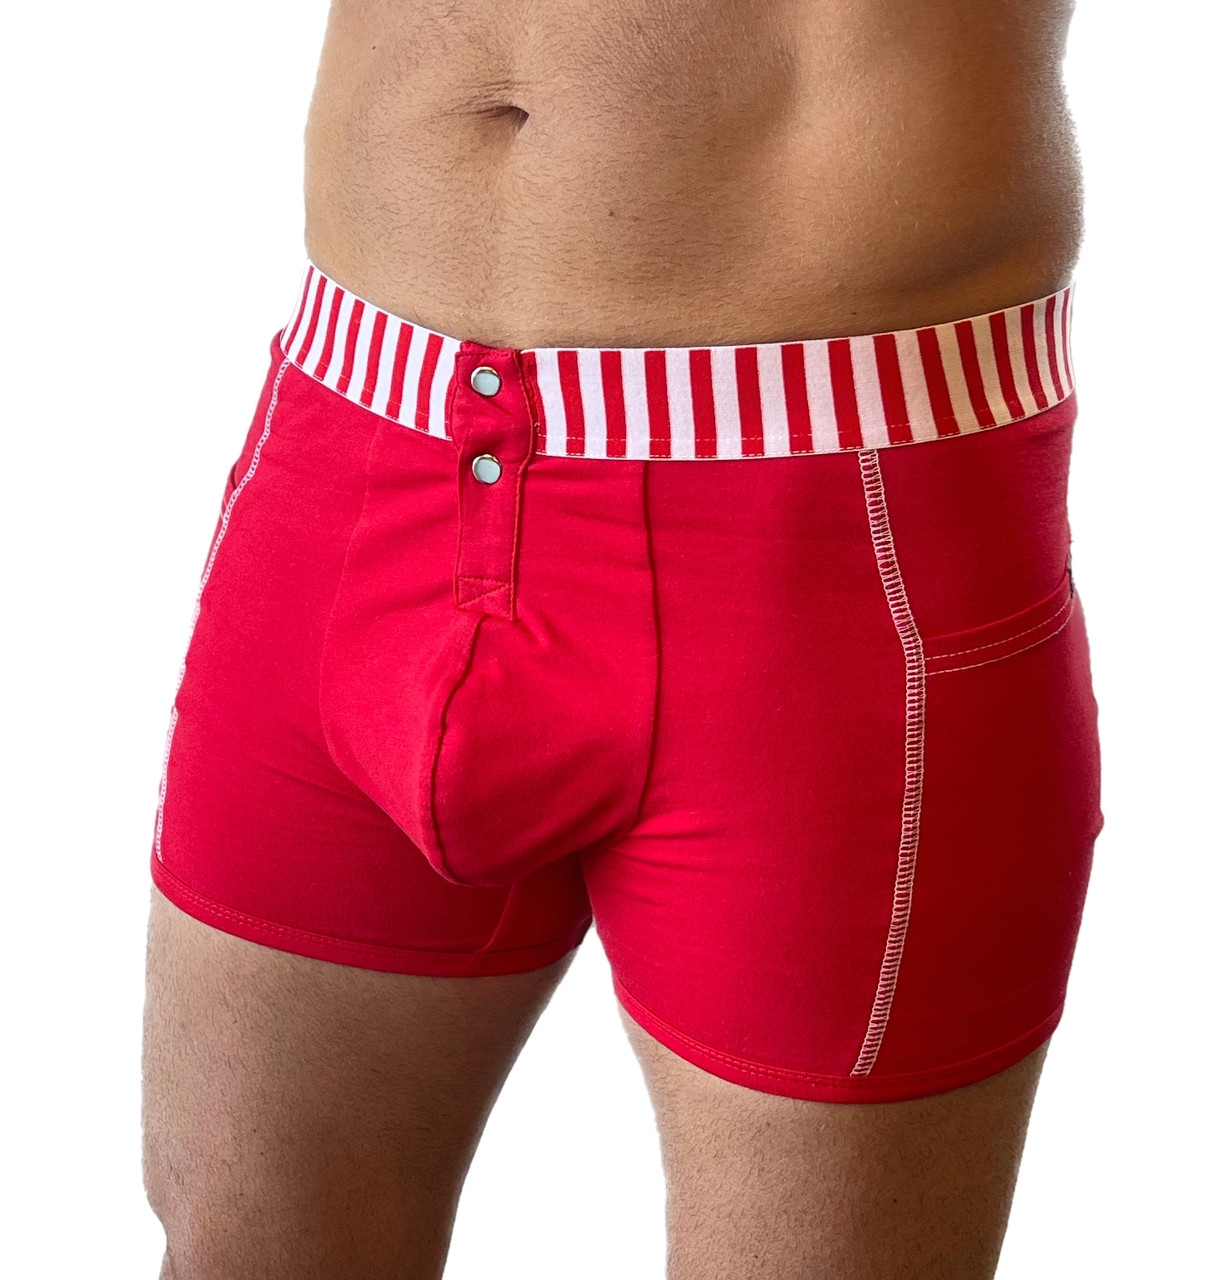 Red Men's Boxer Brief with Pockets & Red/White Stripe Elastic Band